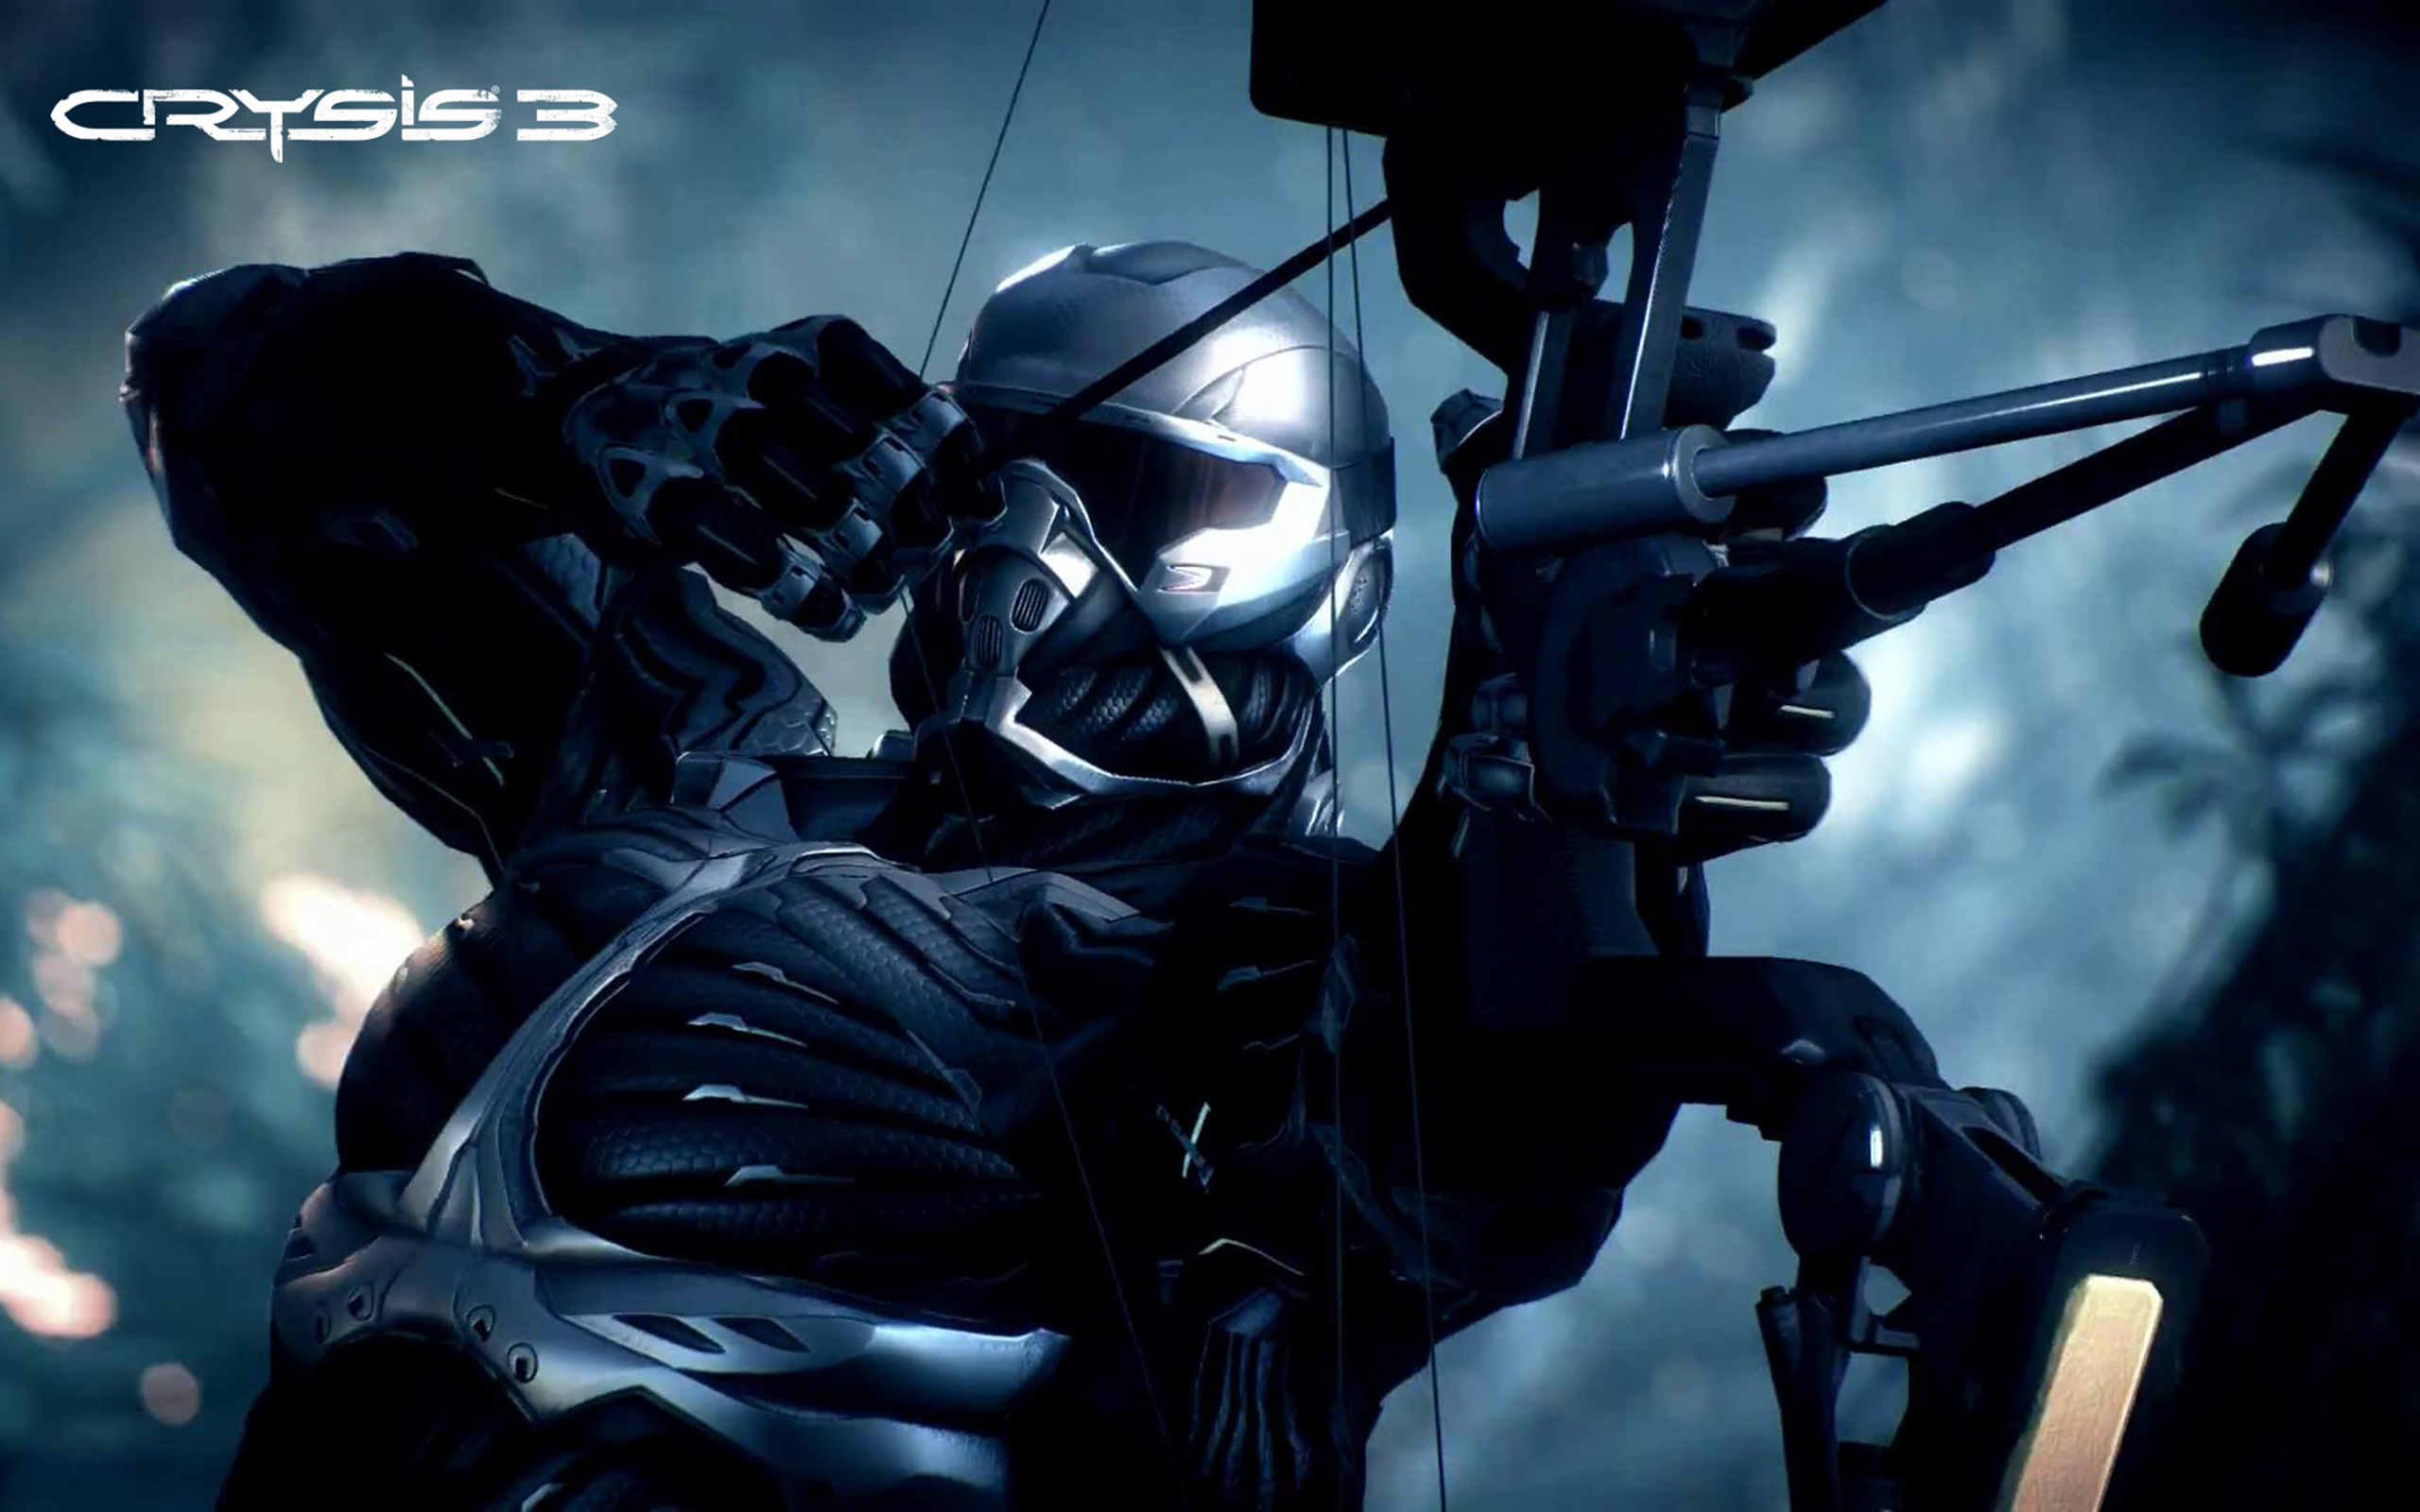 Crysis Exclusive HD Wallpaper